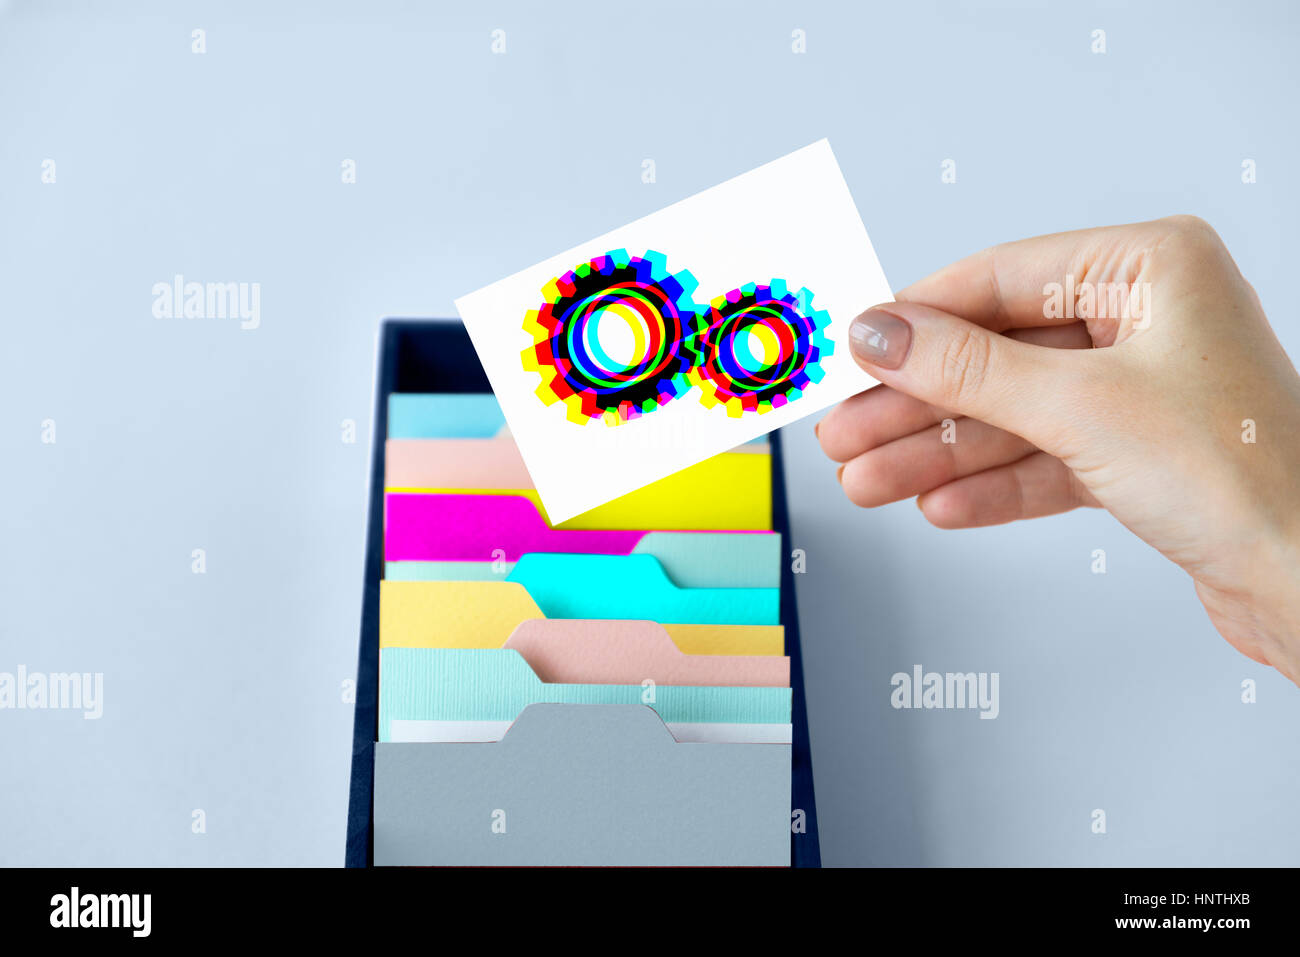 Technology Gadget Application Icons Signs Concept Stock Photo